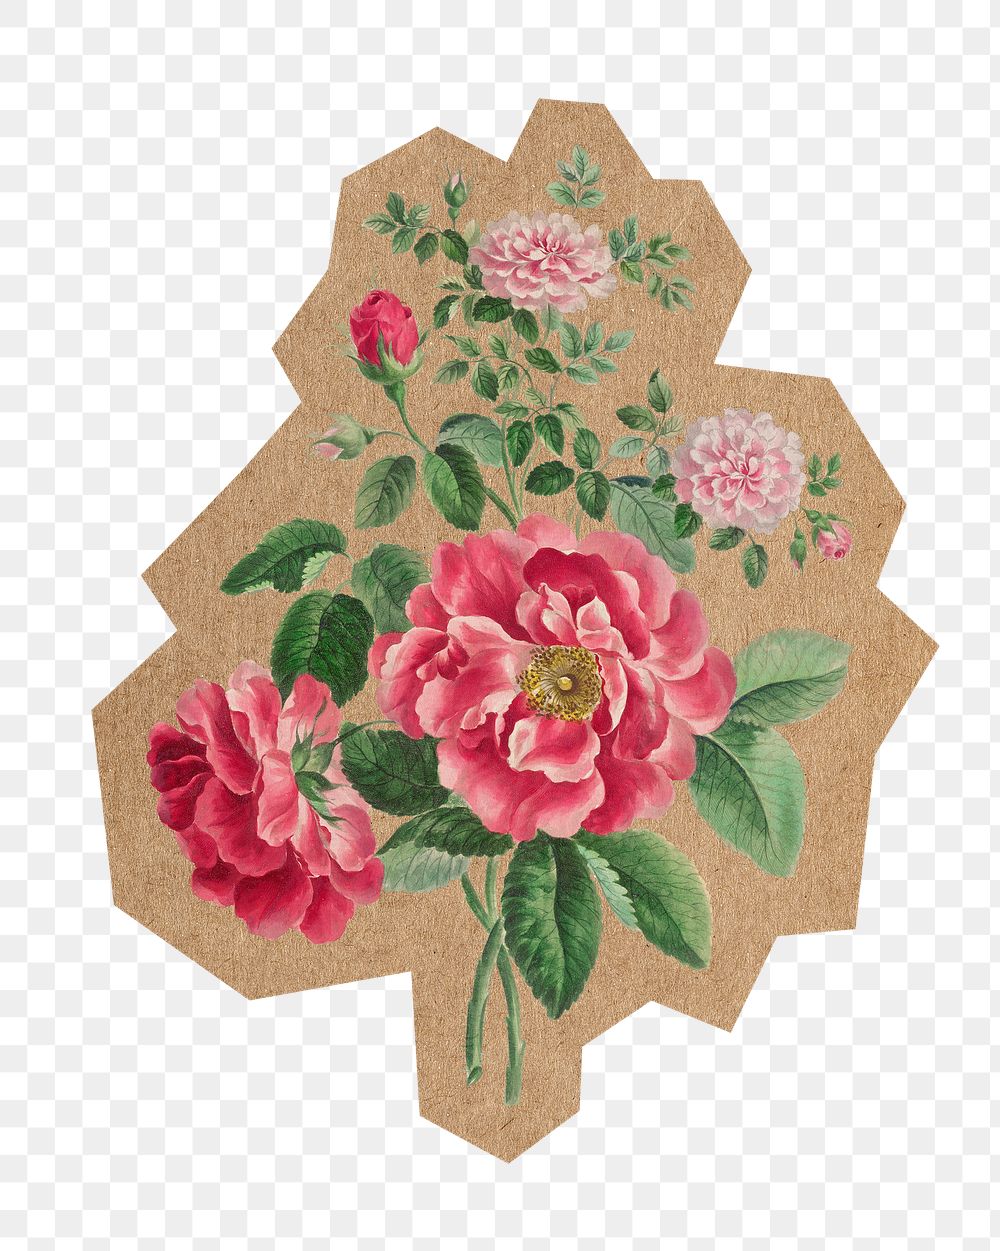 Pink rose png, cut out paper element, transparent background